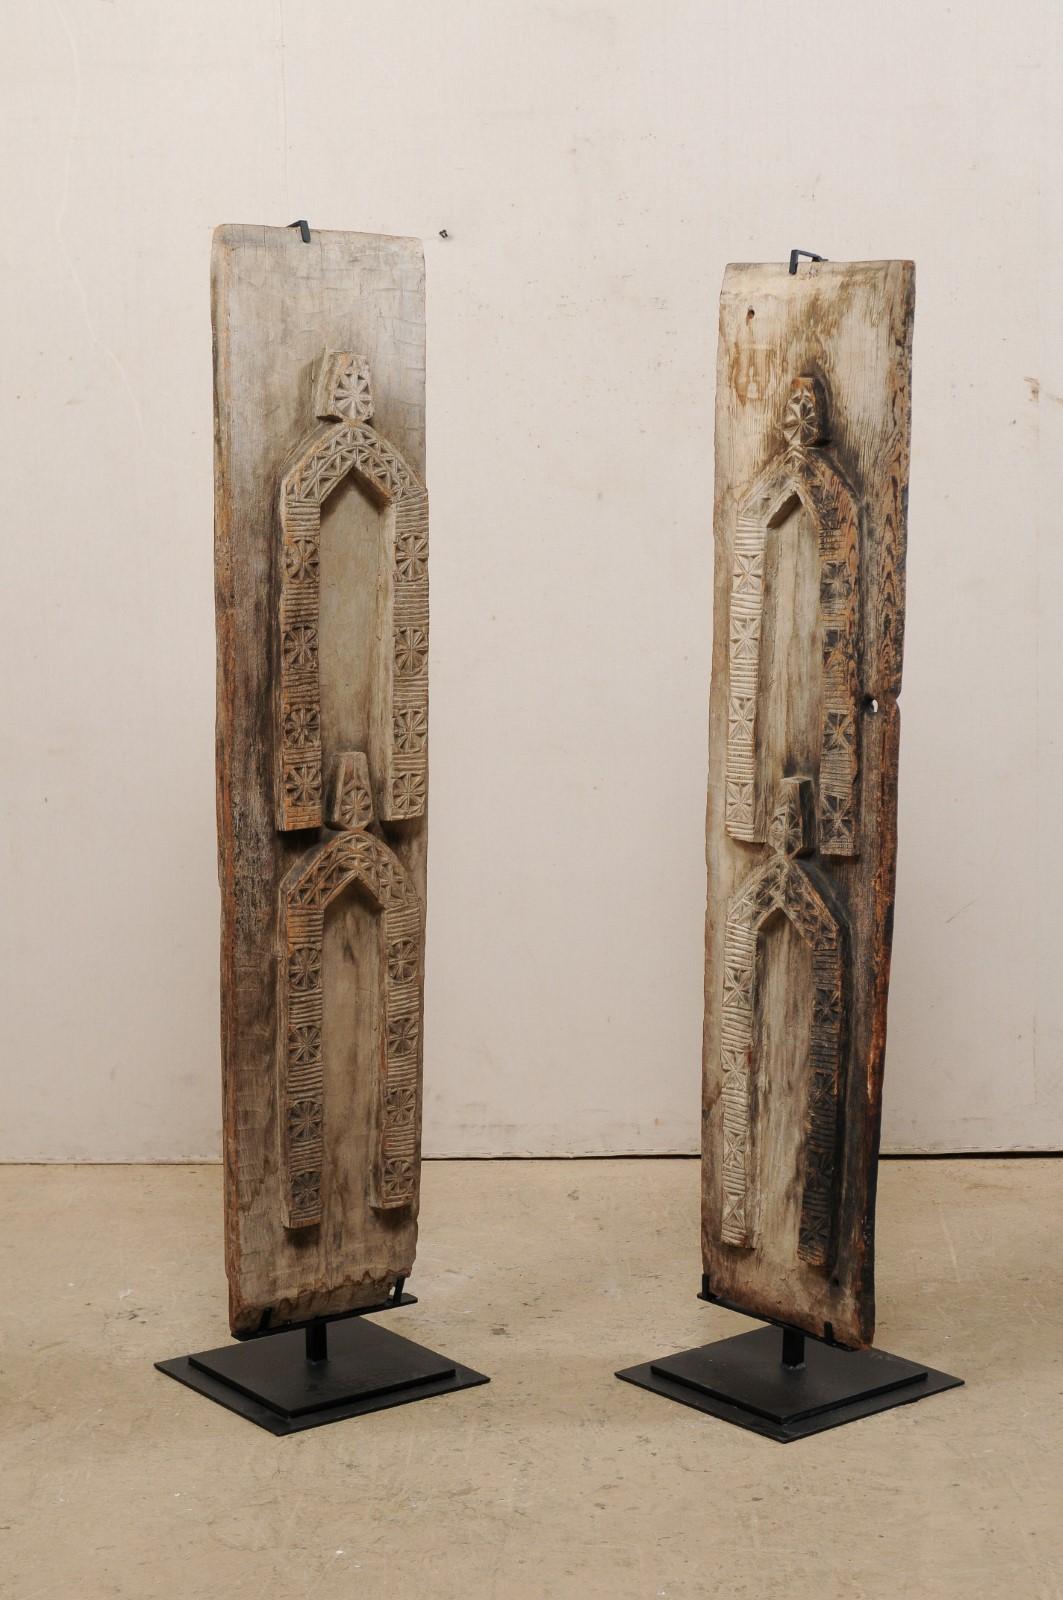 A pair of carved wood wall panels from West Africa, mounted on custom stands. This vintage pair of West African panels are each rectangular in shape with front sides which have been adorn in geometric hand-carvings in a human-shaped form. These